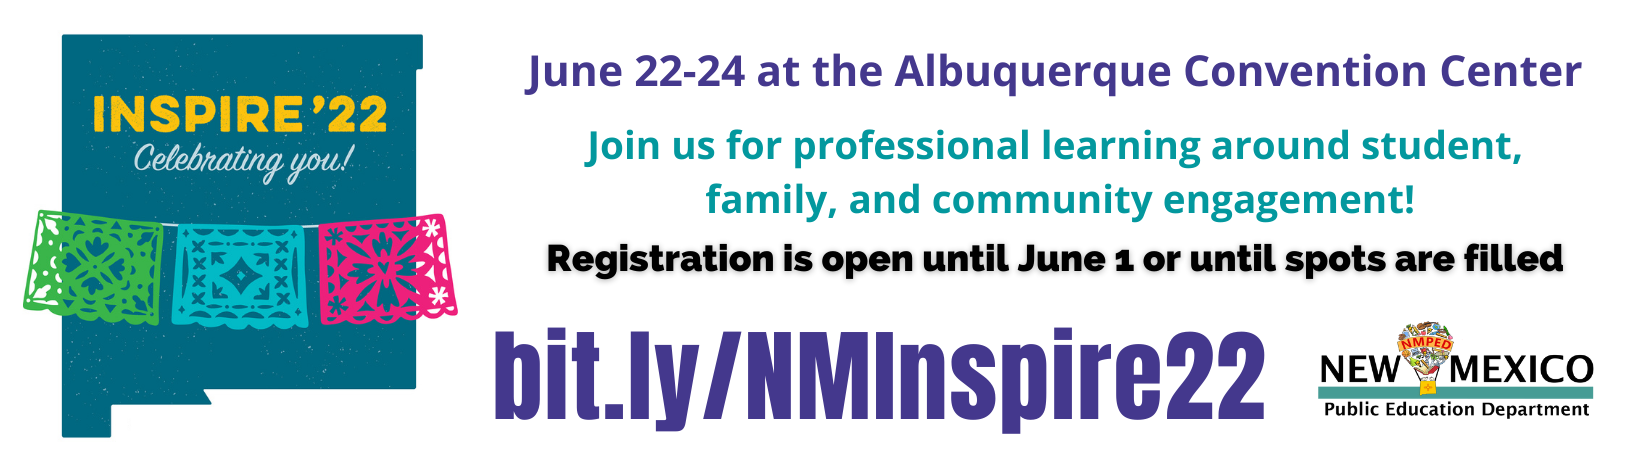 Inspire 22: Celebrating you. June 22-24 at the Albuquerque Convention Center. Join us for professional learning around student, familiy, and ocmmunity engagement! Registration is open until June 1 or until spots are filled